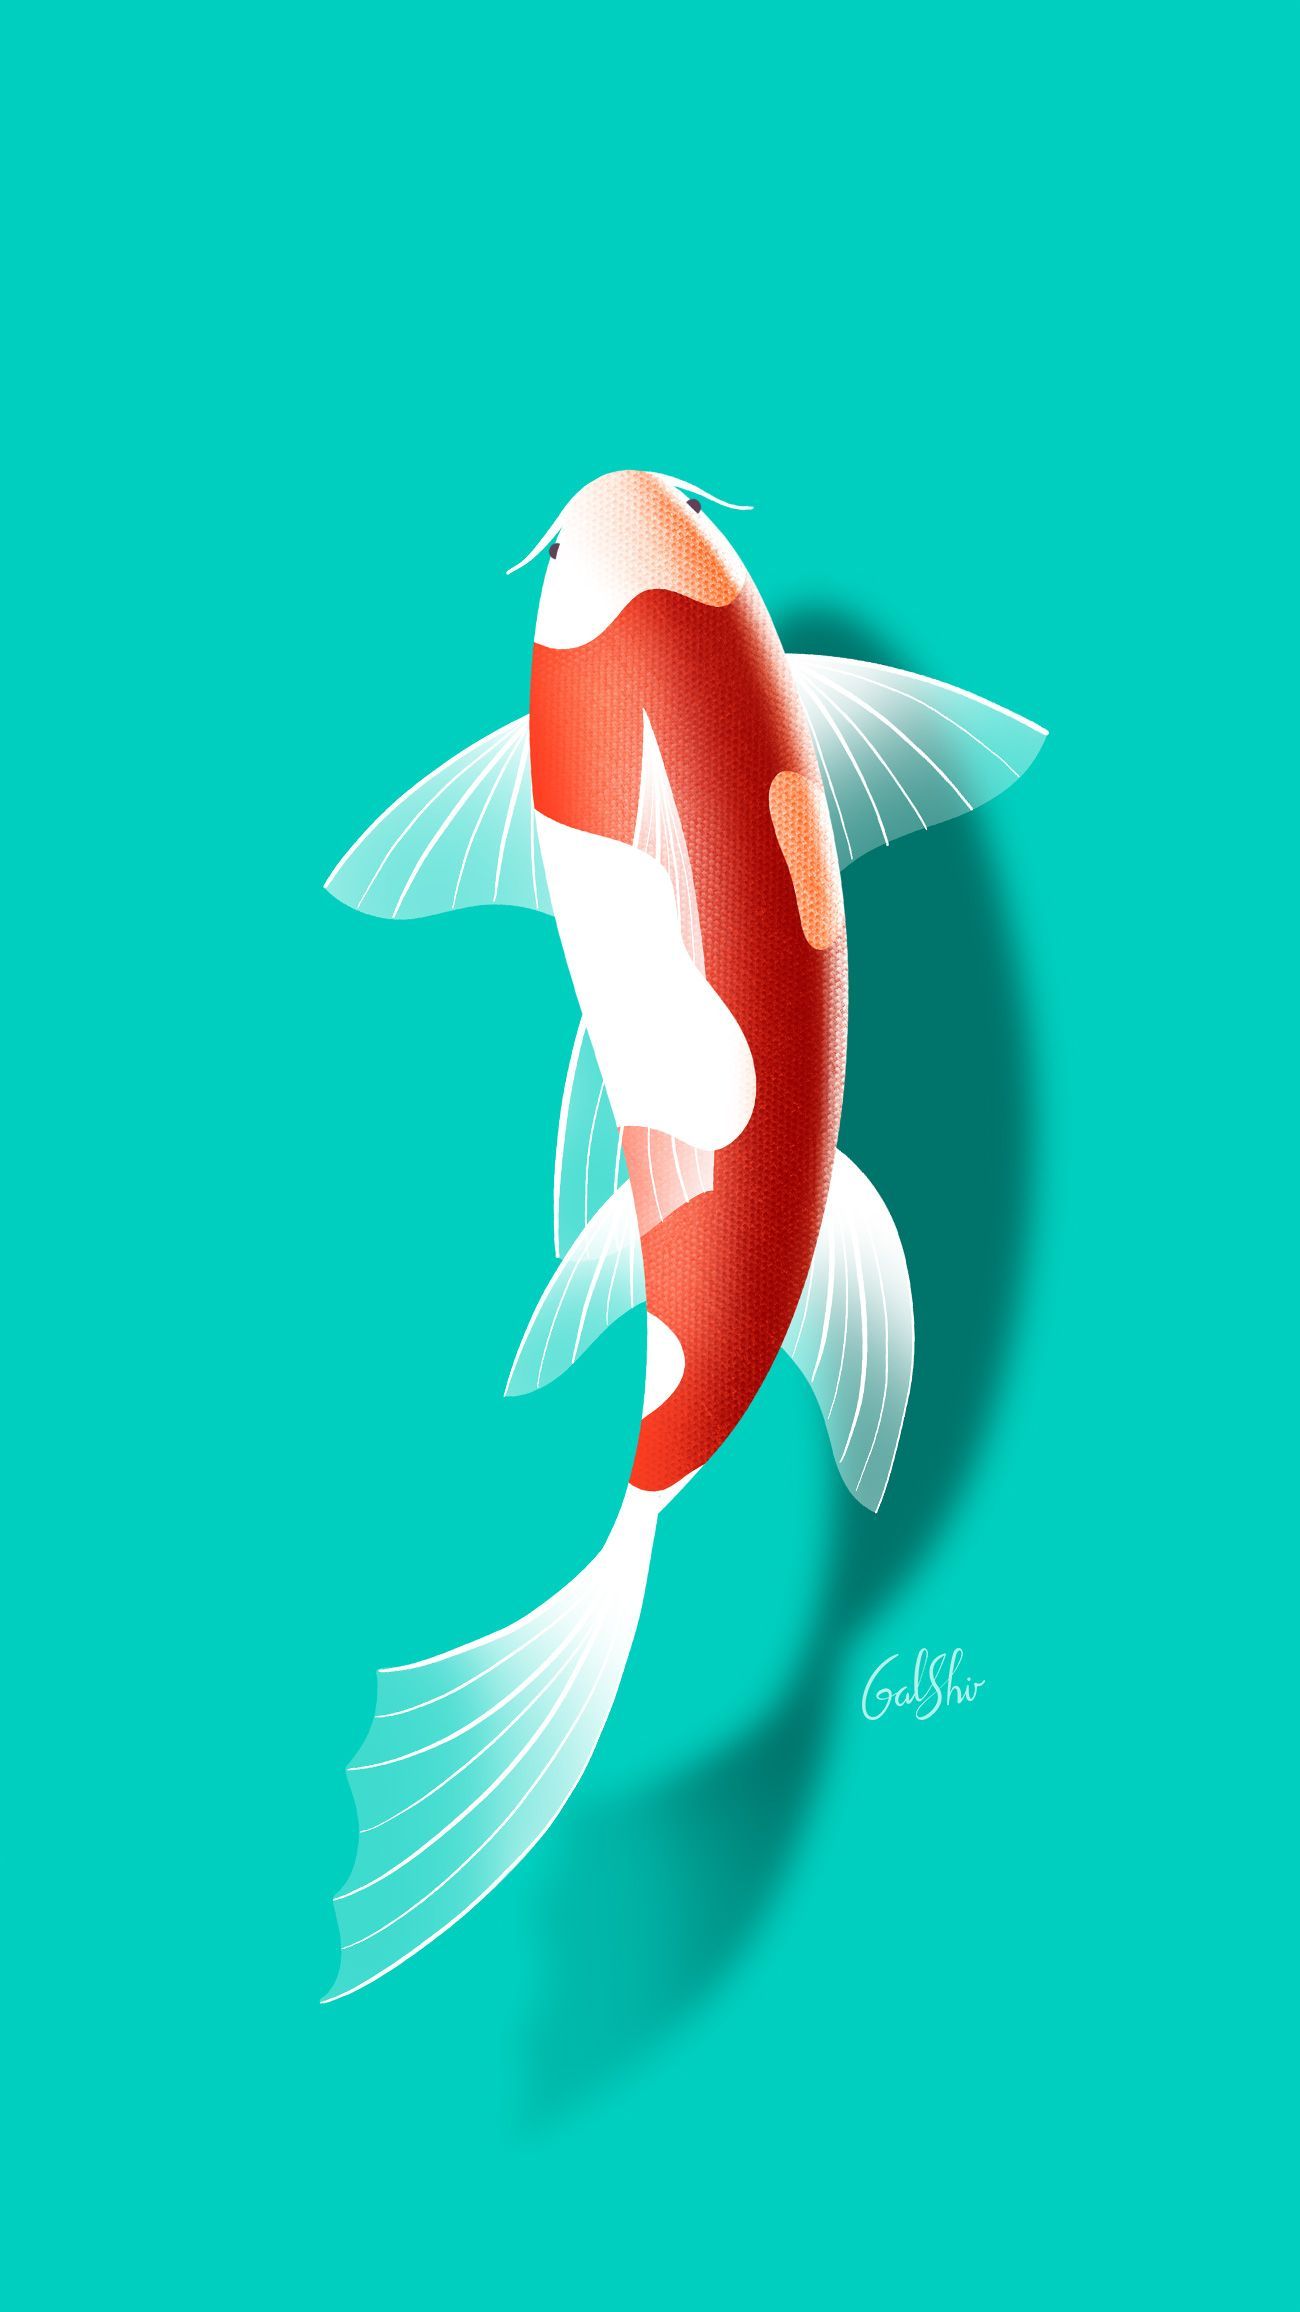 A digital painting of a koi fish on a blue background - Koi fish